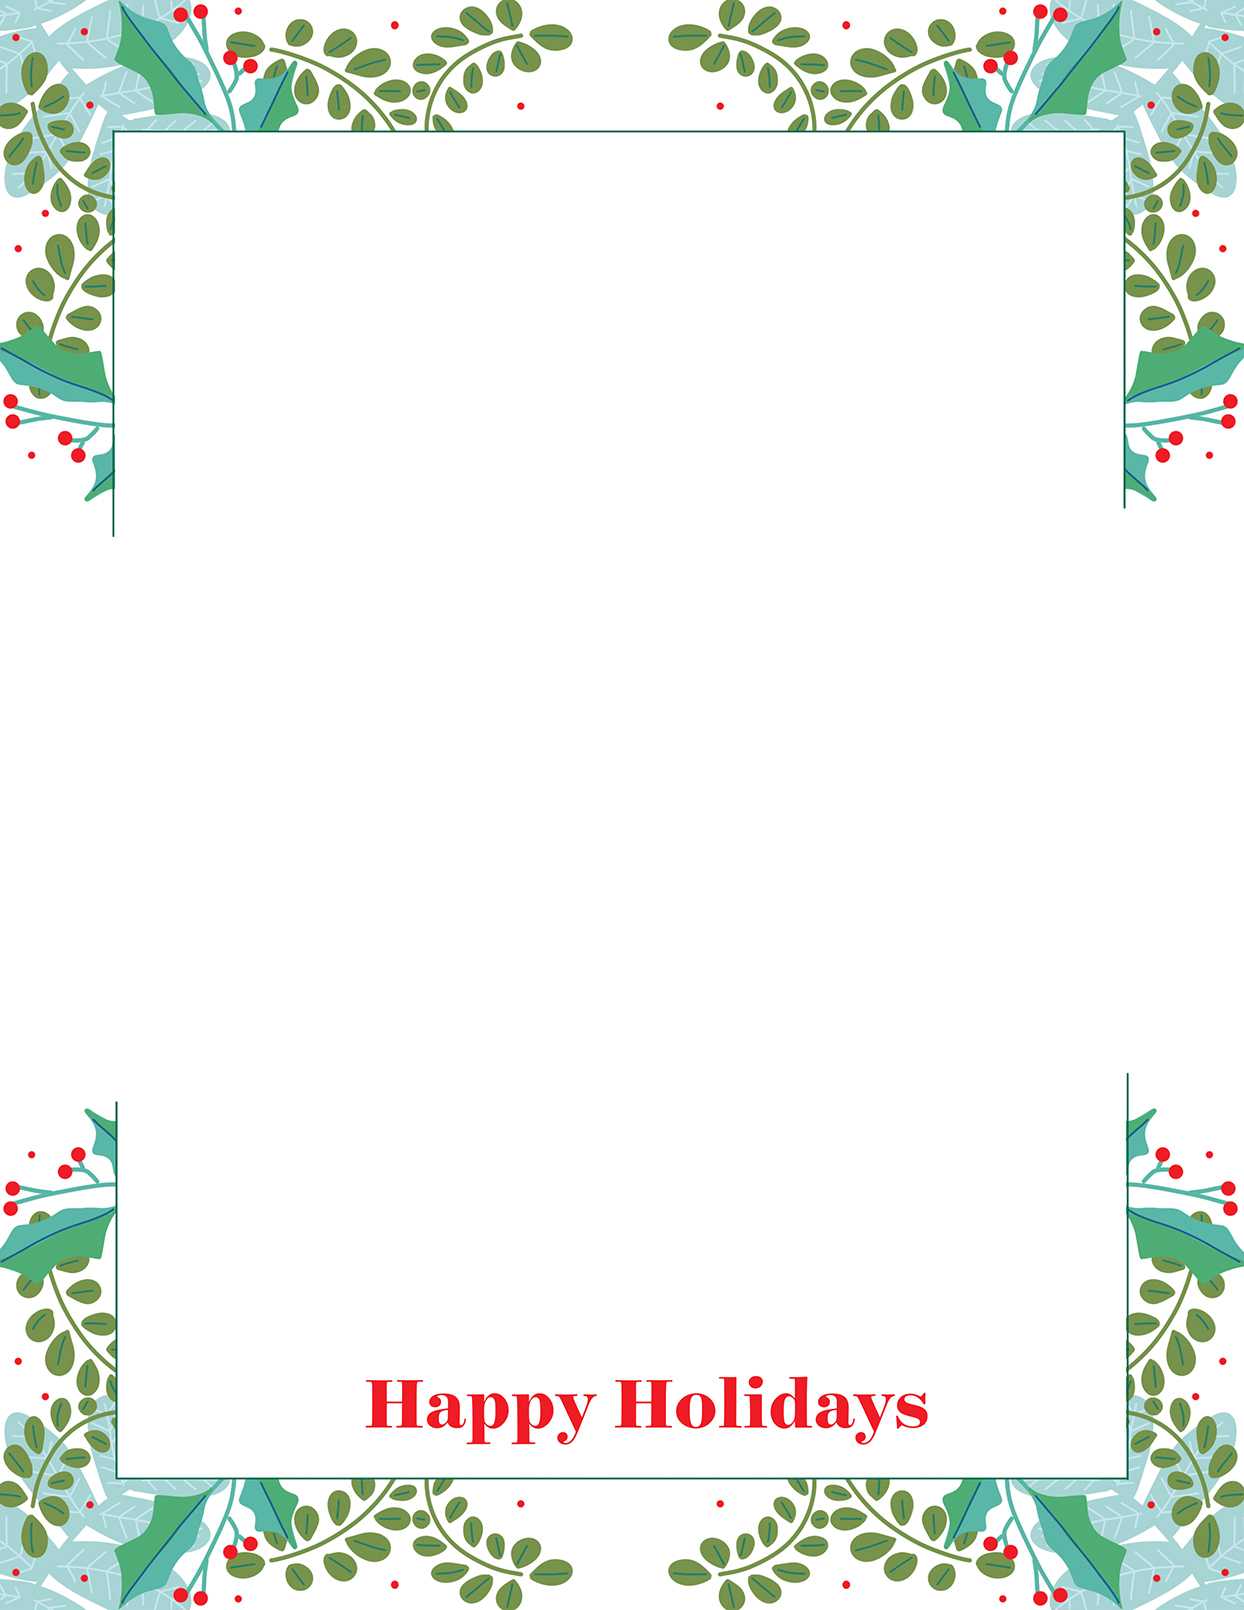 33 Free Christmas Letter Templates | Better Homes & Gardens Regarding Christmas Note Card Templates